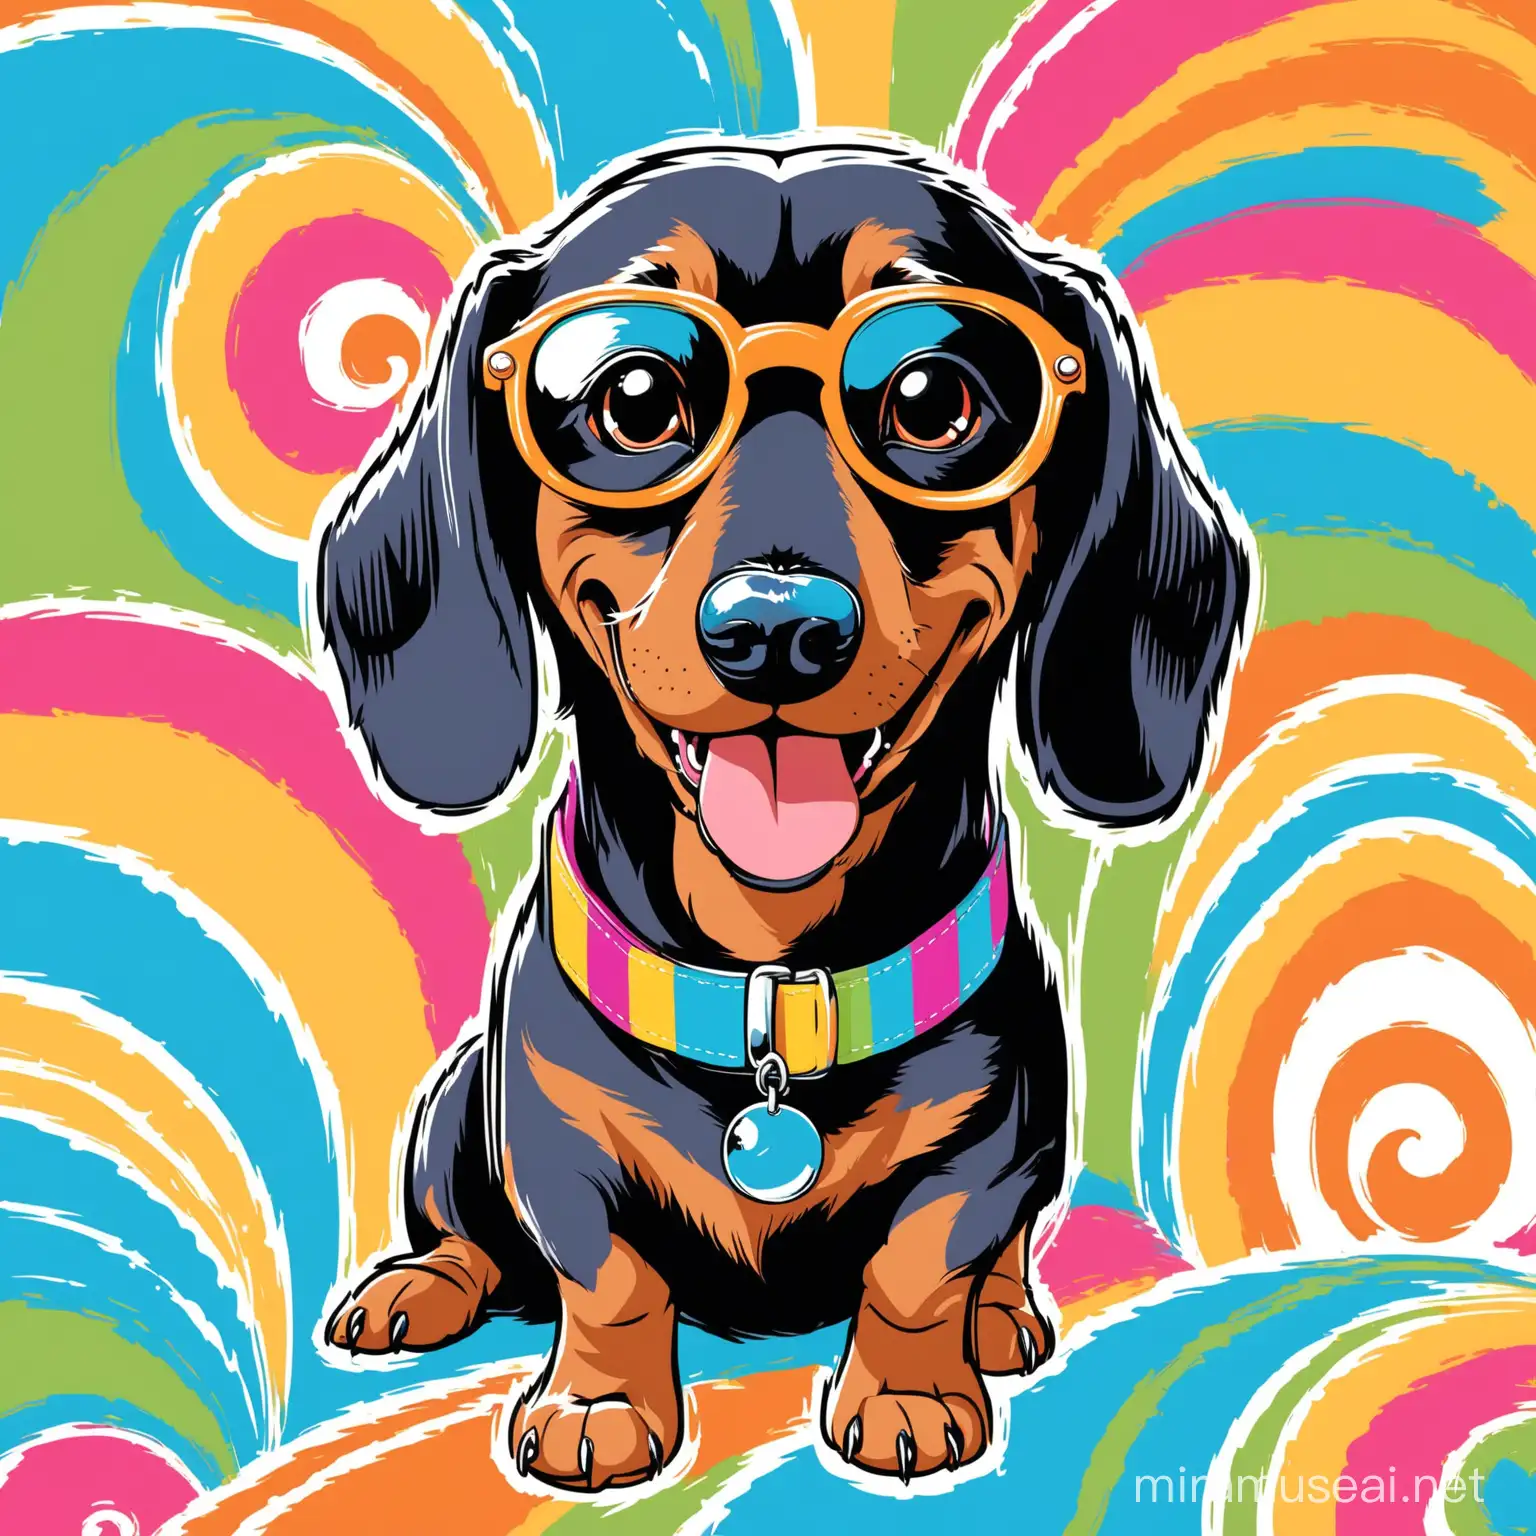 A delightful and vibrant illustration of a retro-styled dachshund, exuding groovy vibes. The dachshund is wearing cool shades, a colorful collar, and a smile capturing its playful spirit. The overall atmosphere is fun, nostalgic, and full of positive energy. For t-shirt design